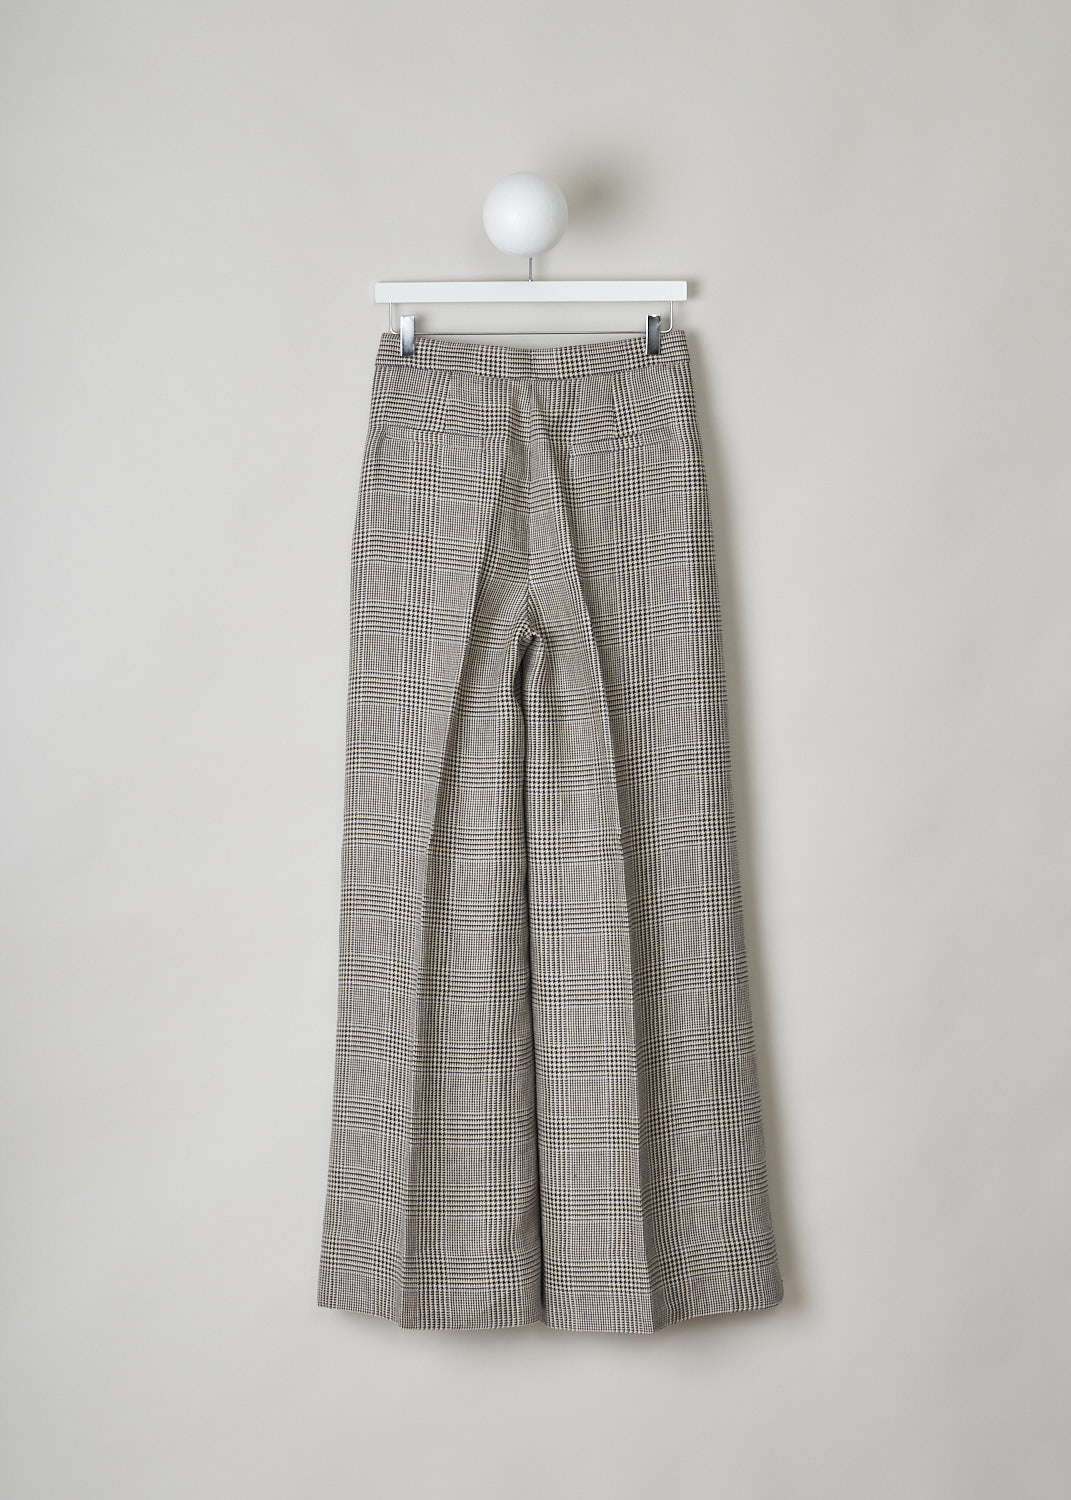 BRUNELLO CUCINELLI, BEIGE LINEN HOUNDSTOOTH PANTS, MF576P6969_C004, Beige, Print, Back, These high-waisted pants have straight wide pant legs with a beige Houndstooth pattern. The pant legs have pressed centre creases. These pants have a concealed clasp and zip closure. Slanted pockets can be found in the front and welt pockets in the back.
